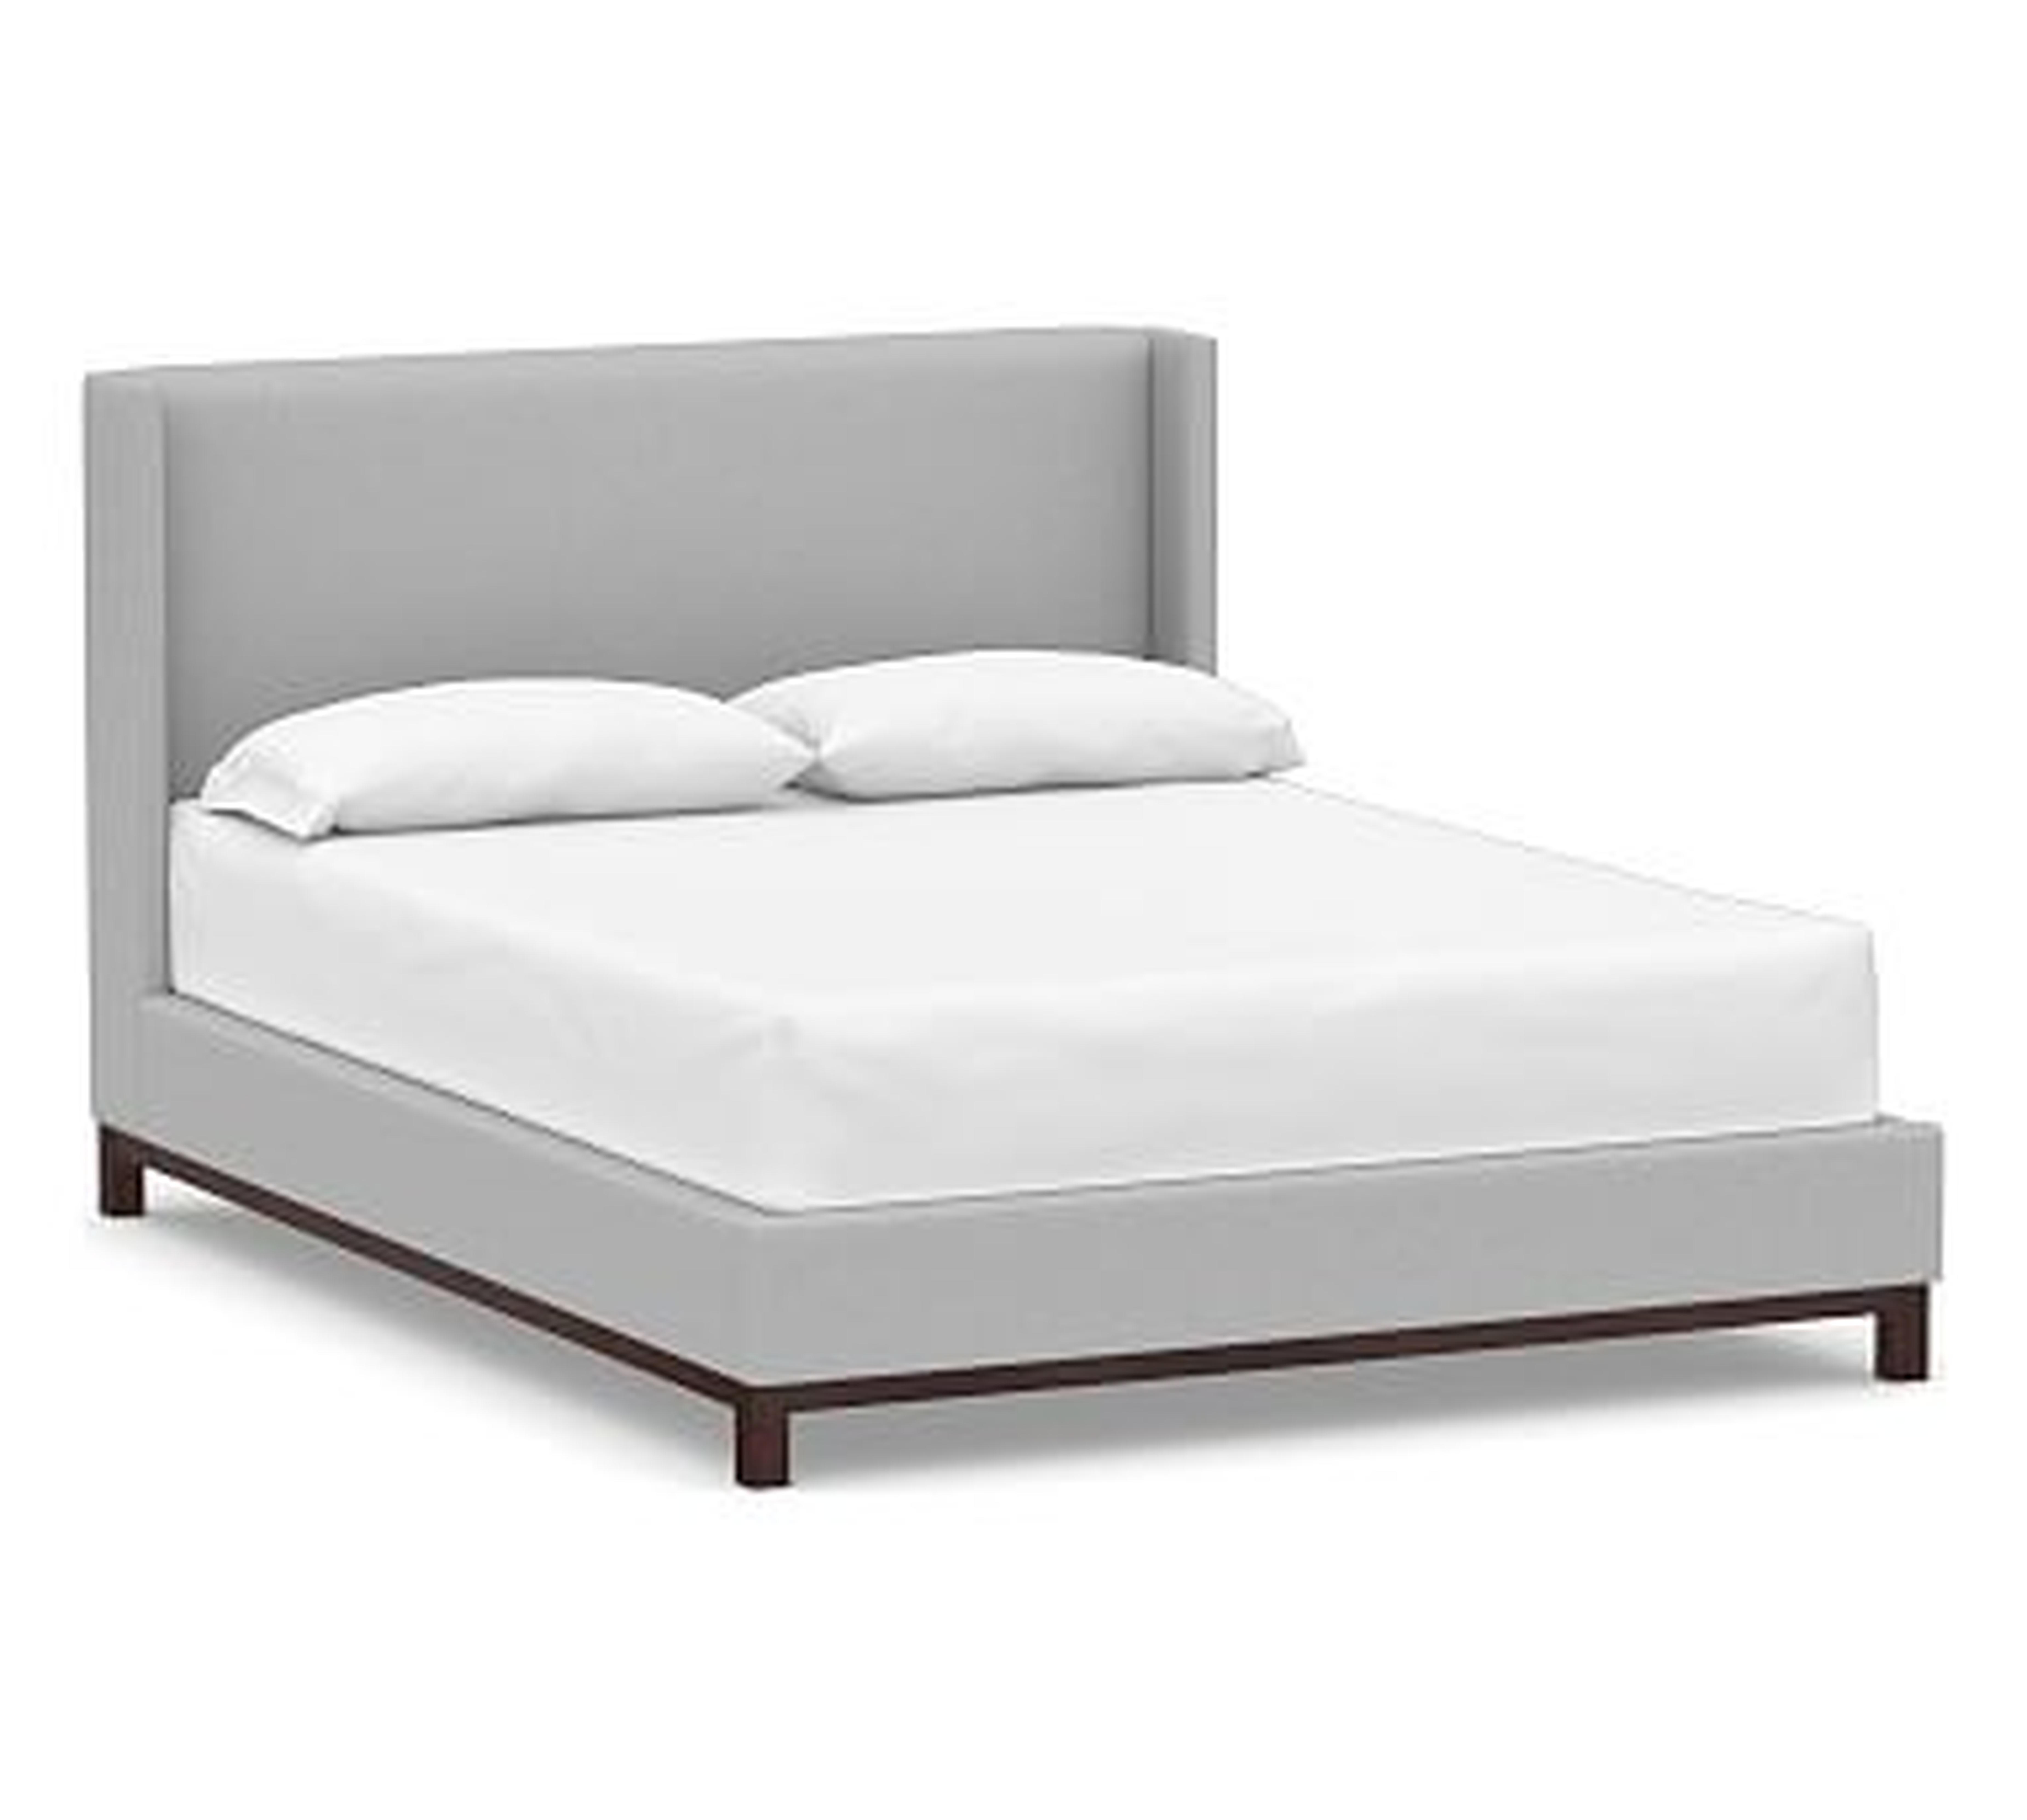 Jake Upholstered Bed with Mahogany Frame, King, Brushed Crossweave Light Gray - Pottery Barn